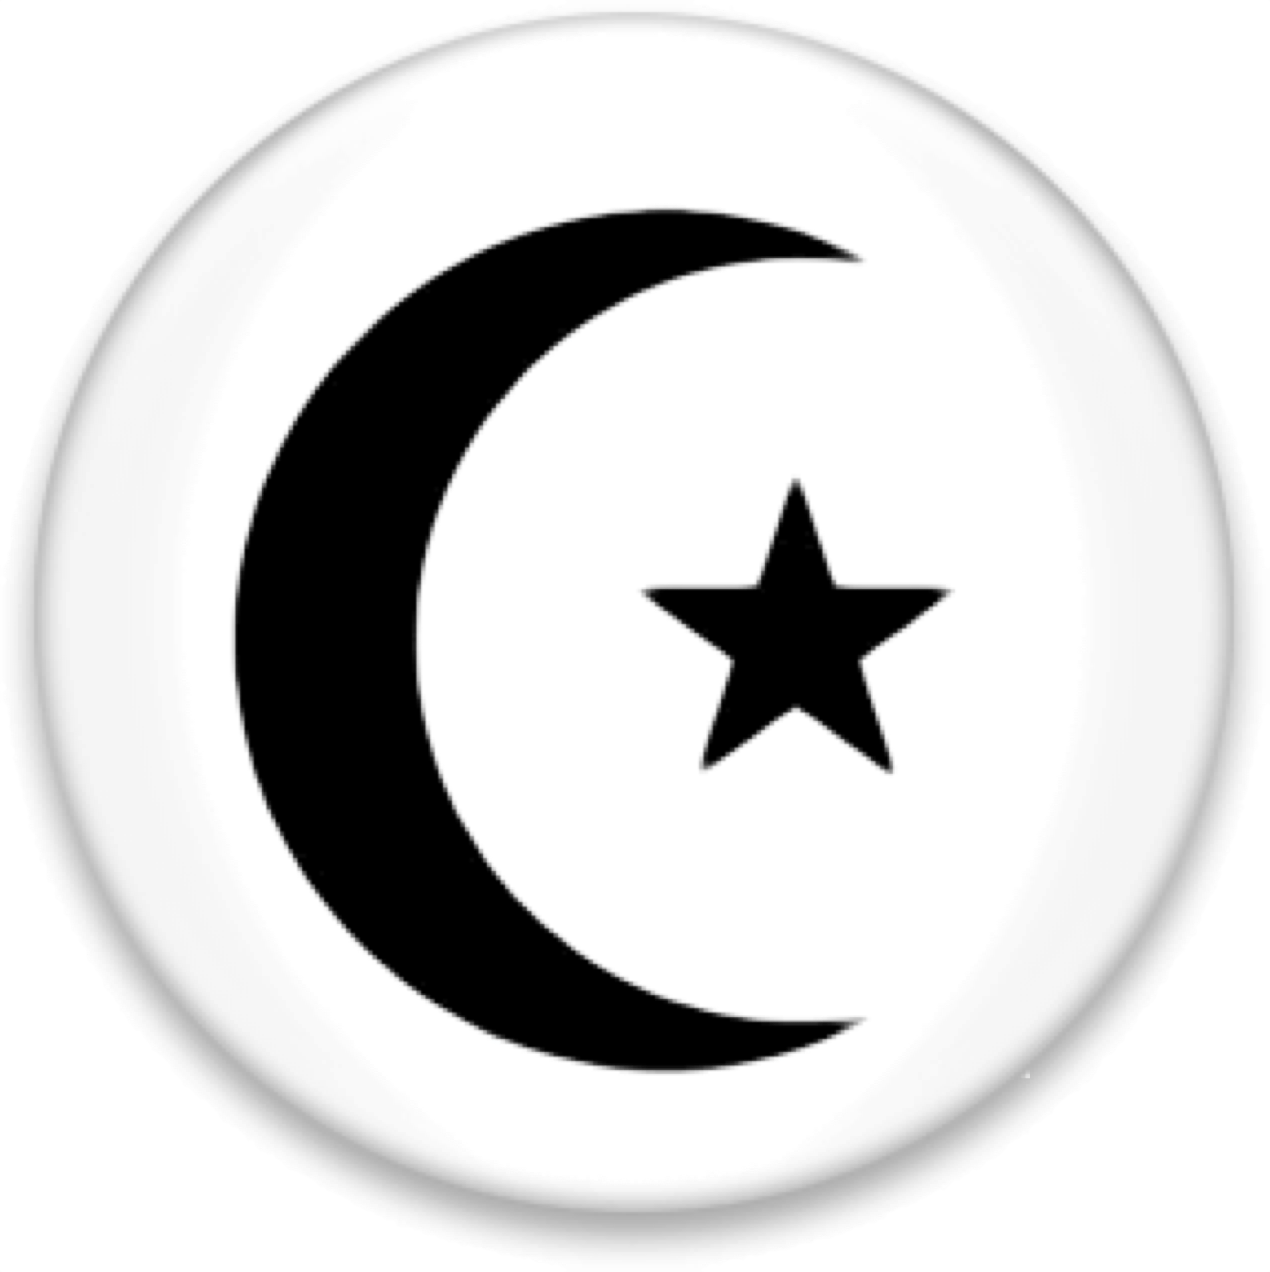 Download The Crescent And The Star Ramadan Crescent Moon And Star Png Image With No Background Pngkey Com